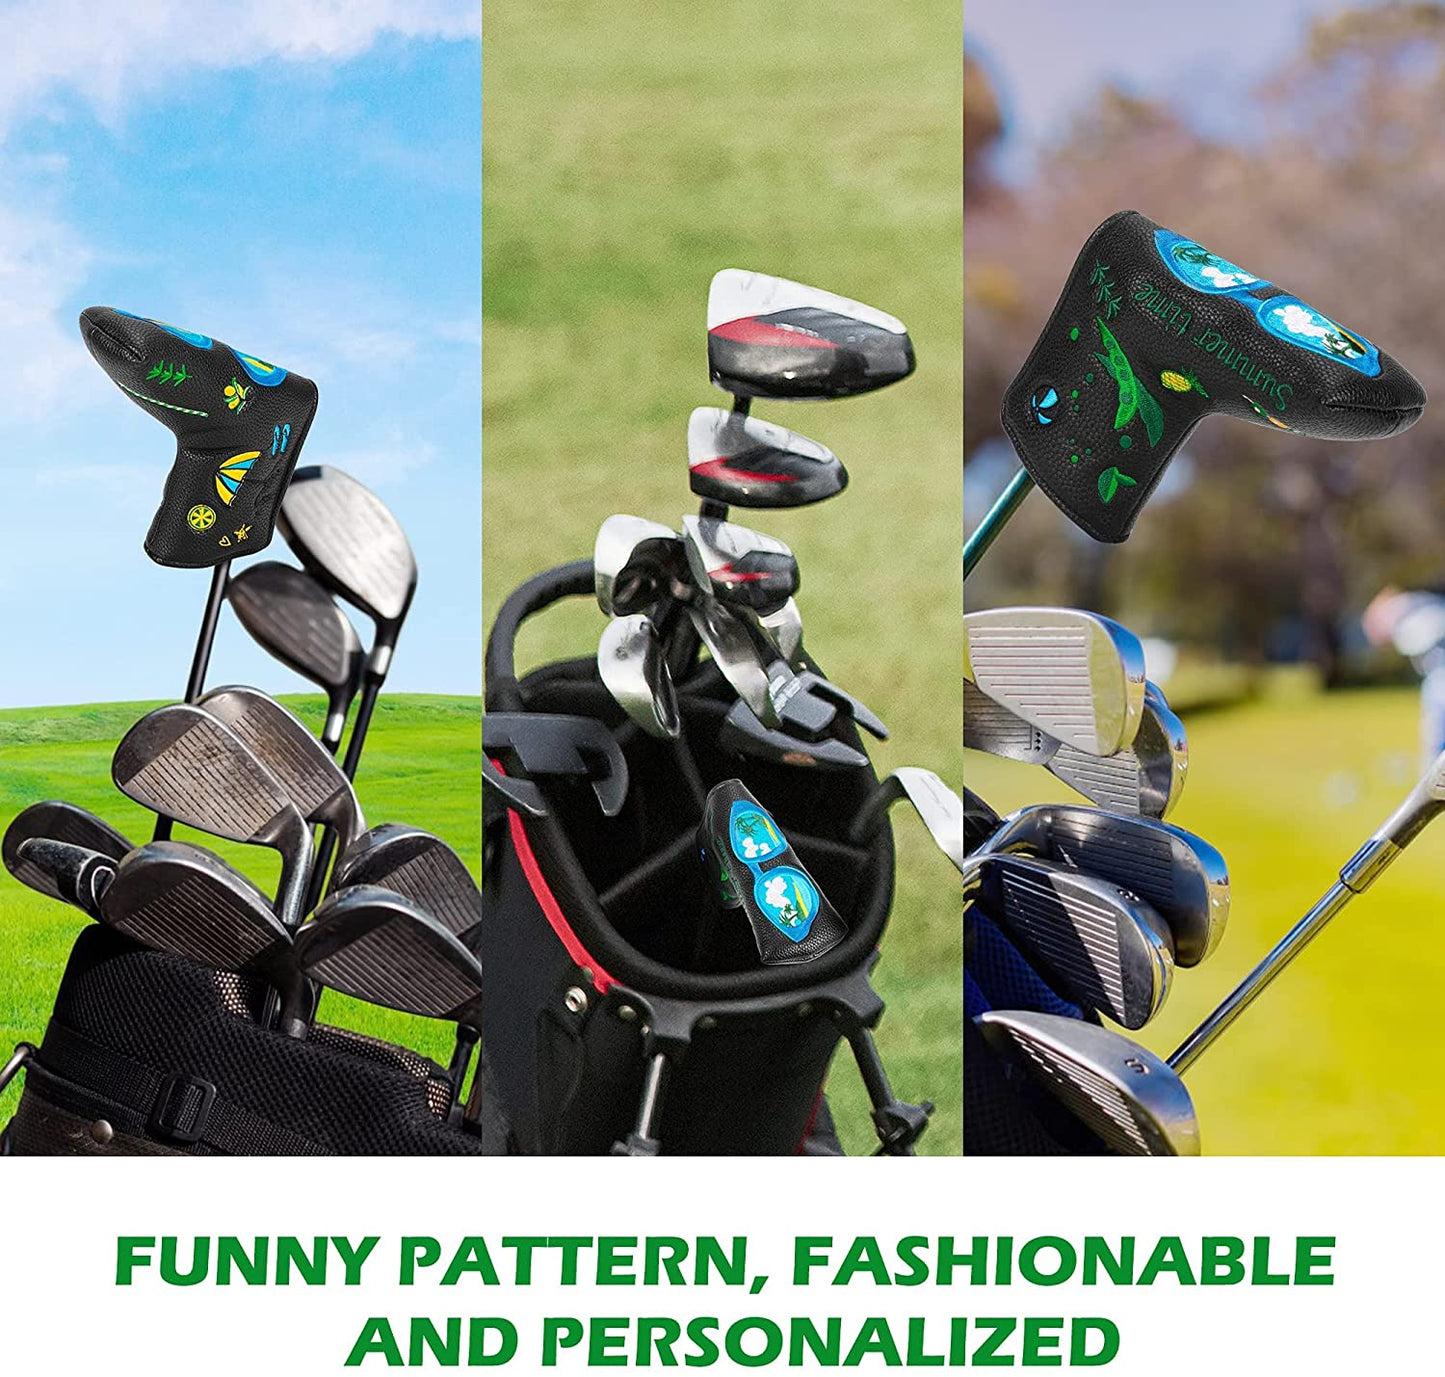 Golf Blade Putter Cover Headcover Magnetic Synthetic Leather Closure Embroidery Funny Patterns Soft for Women and Men Fit Most Brands Protector Black White Color